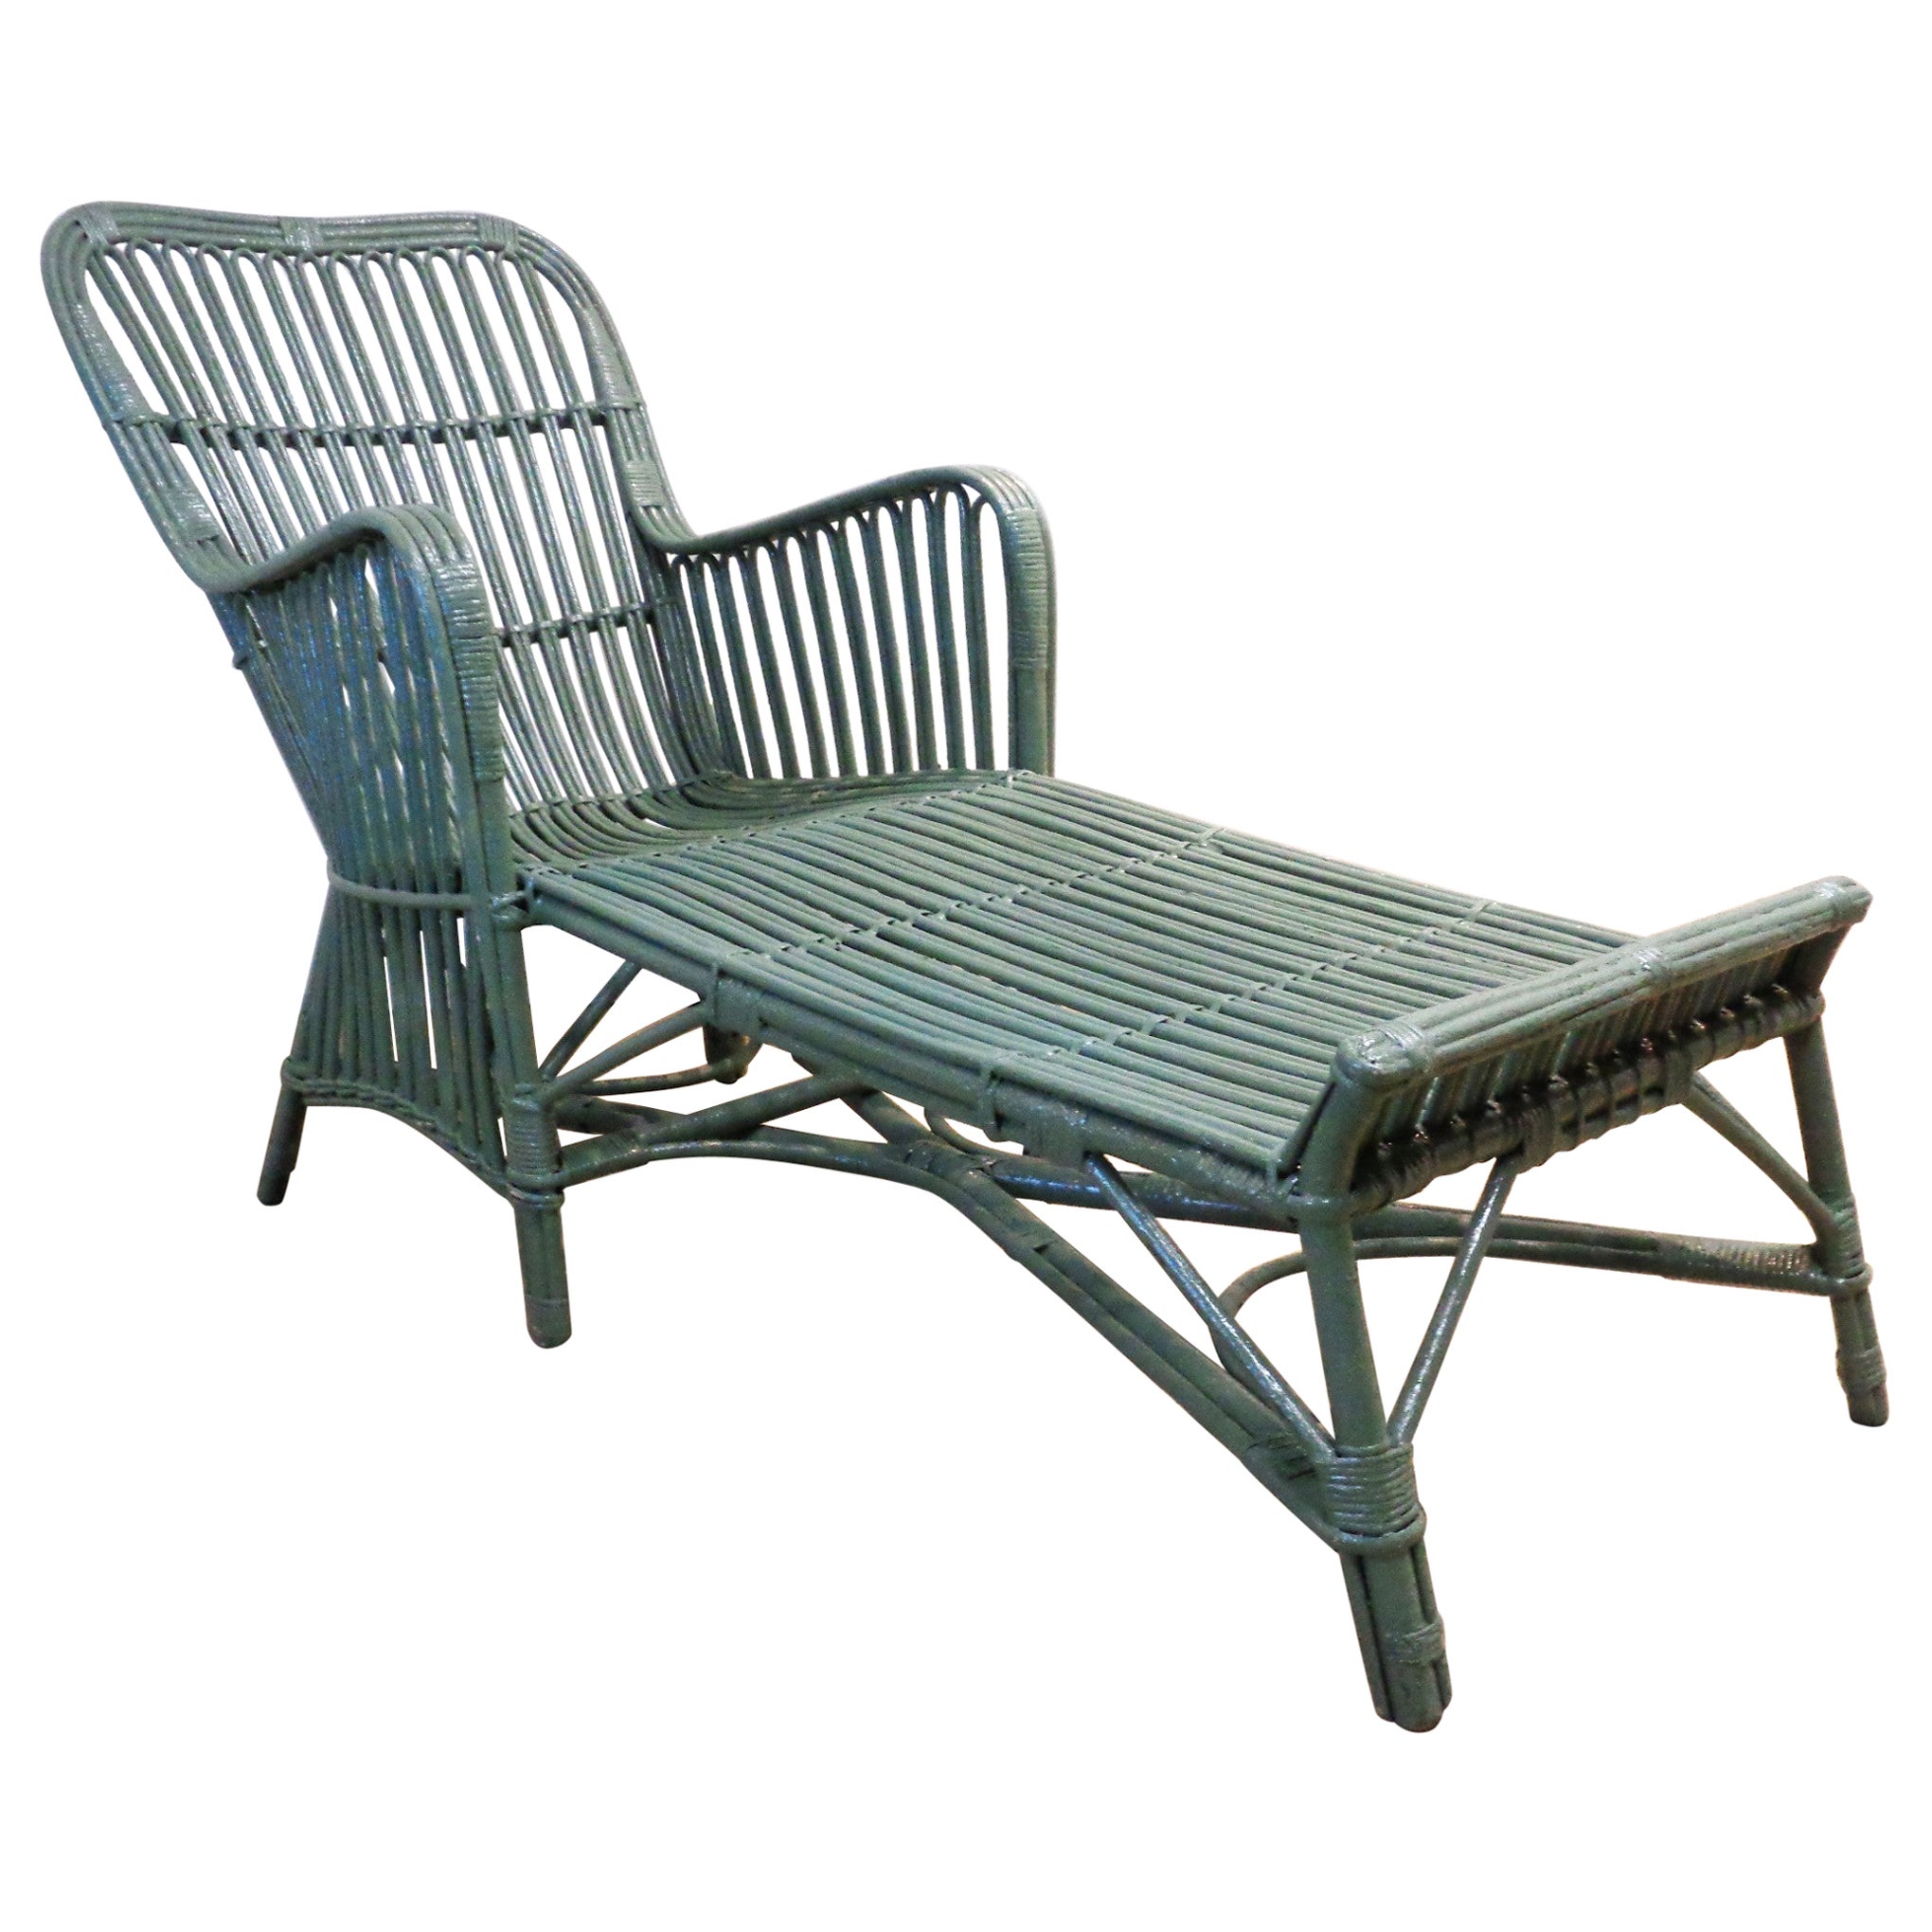 Antique Stick Wicker Chaise Lounge Heywood-Wakefield Attributed Circa 1930 For Sale